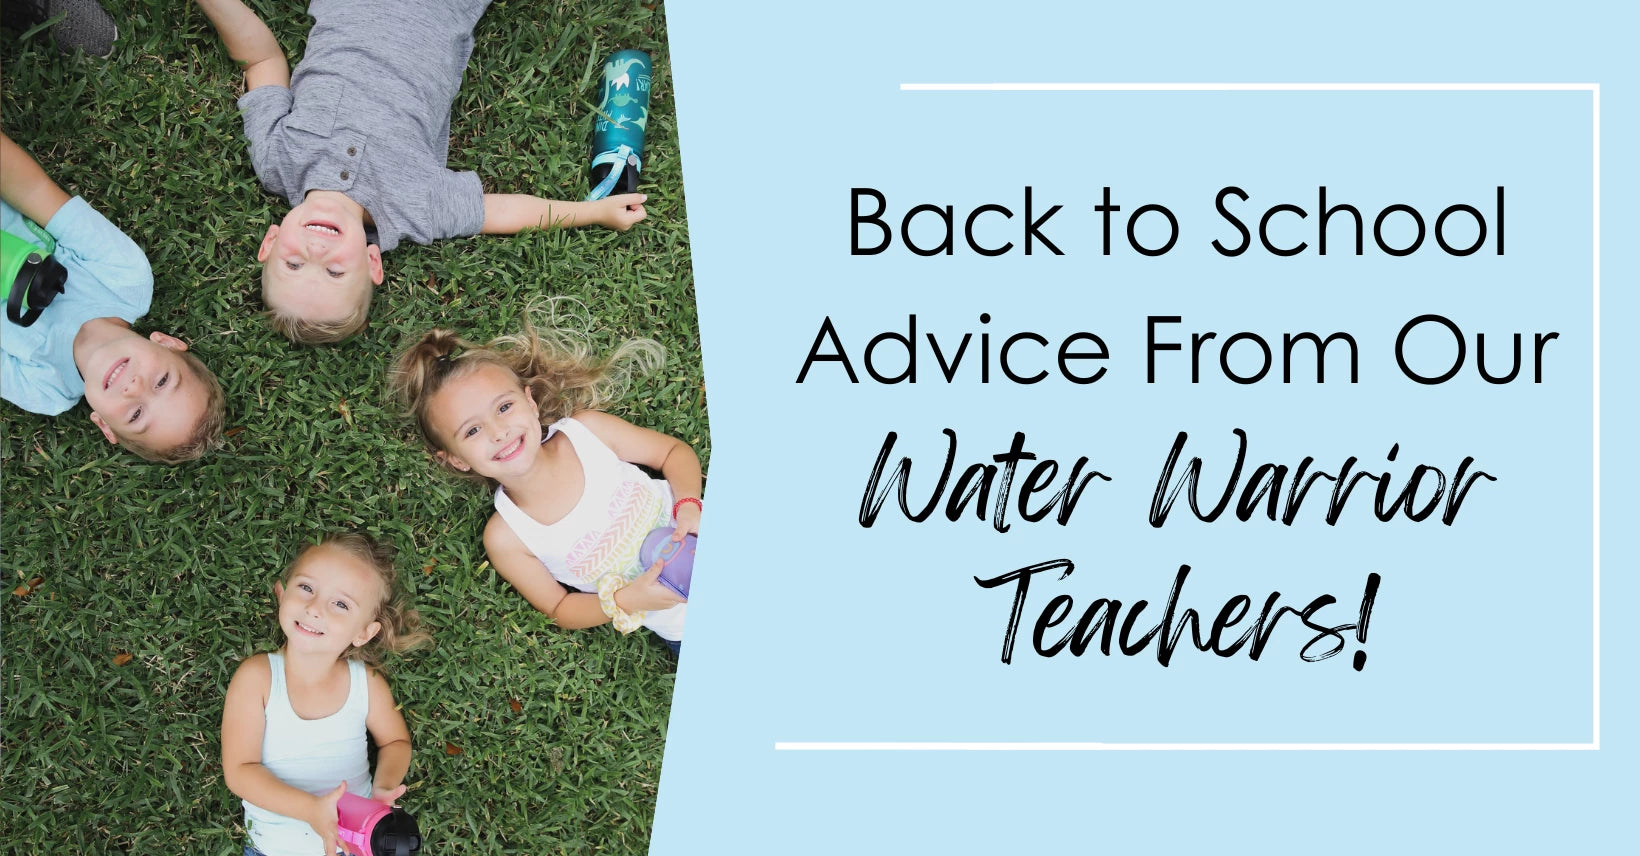 Back to school Advice from the Water Warriors